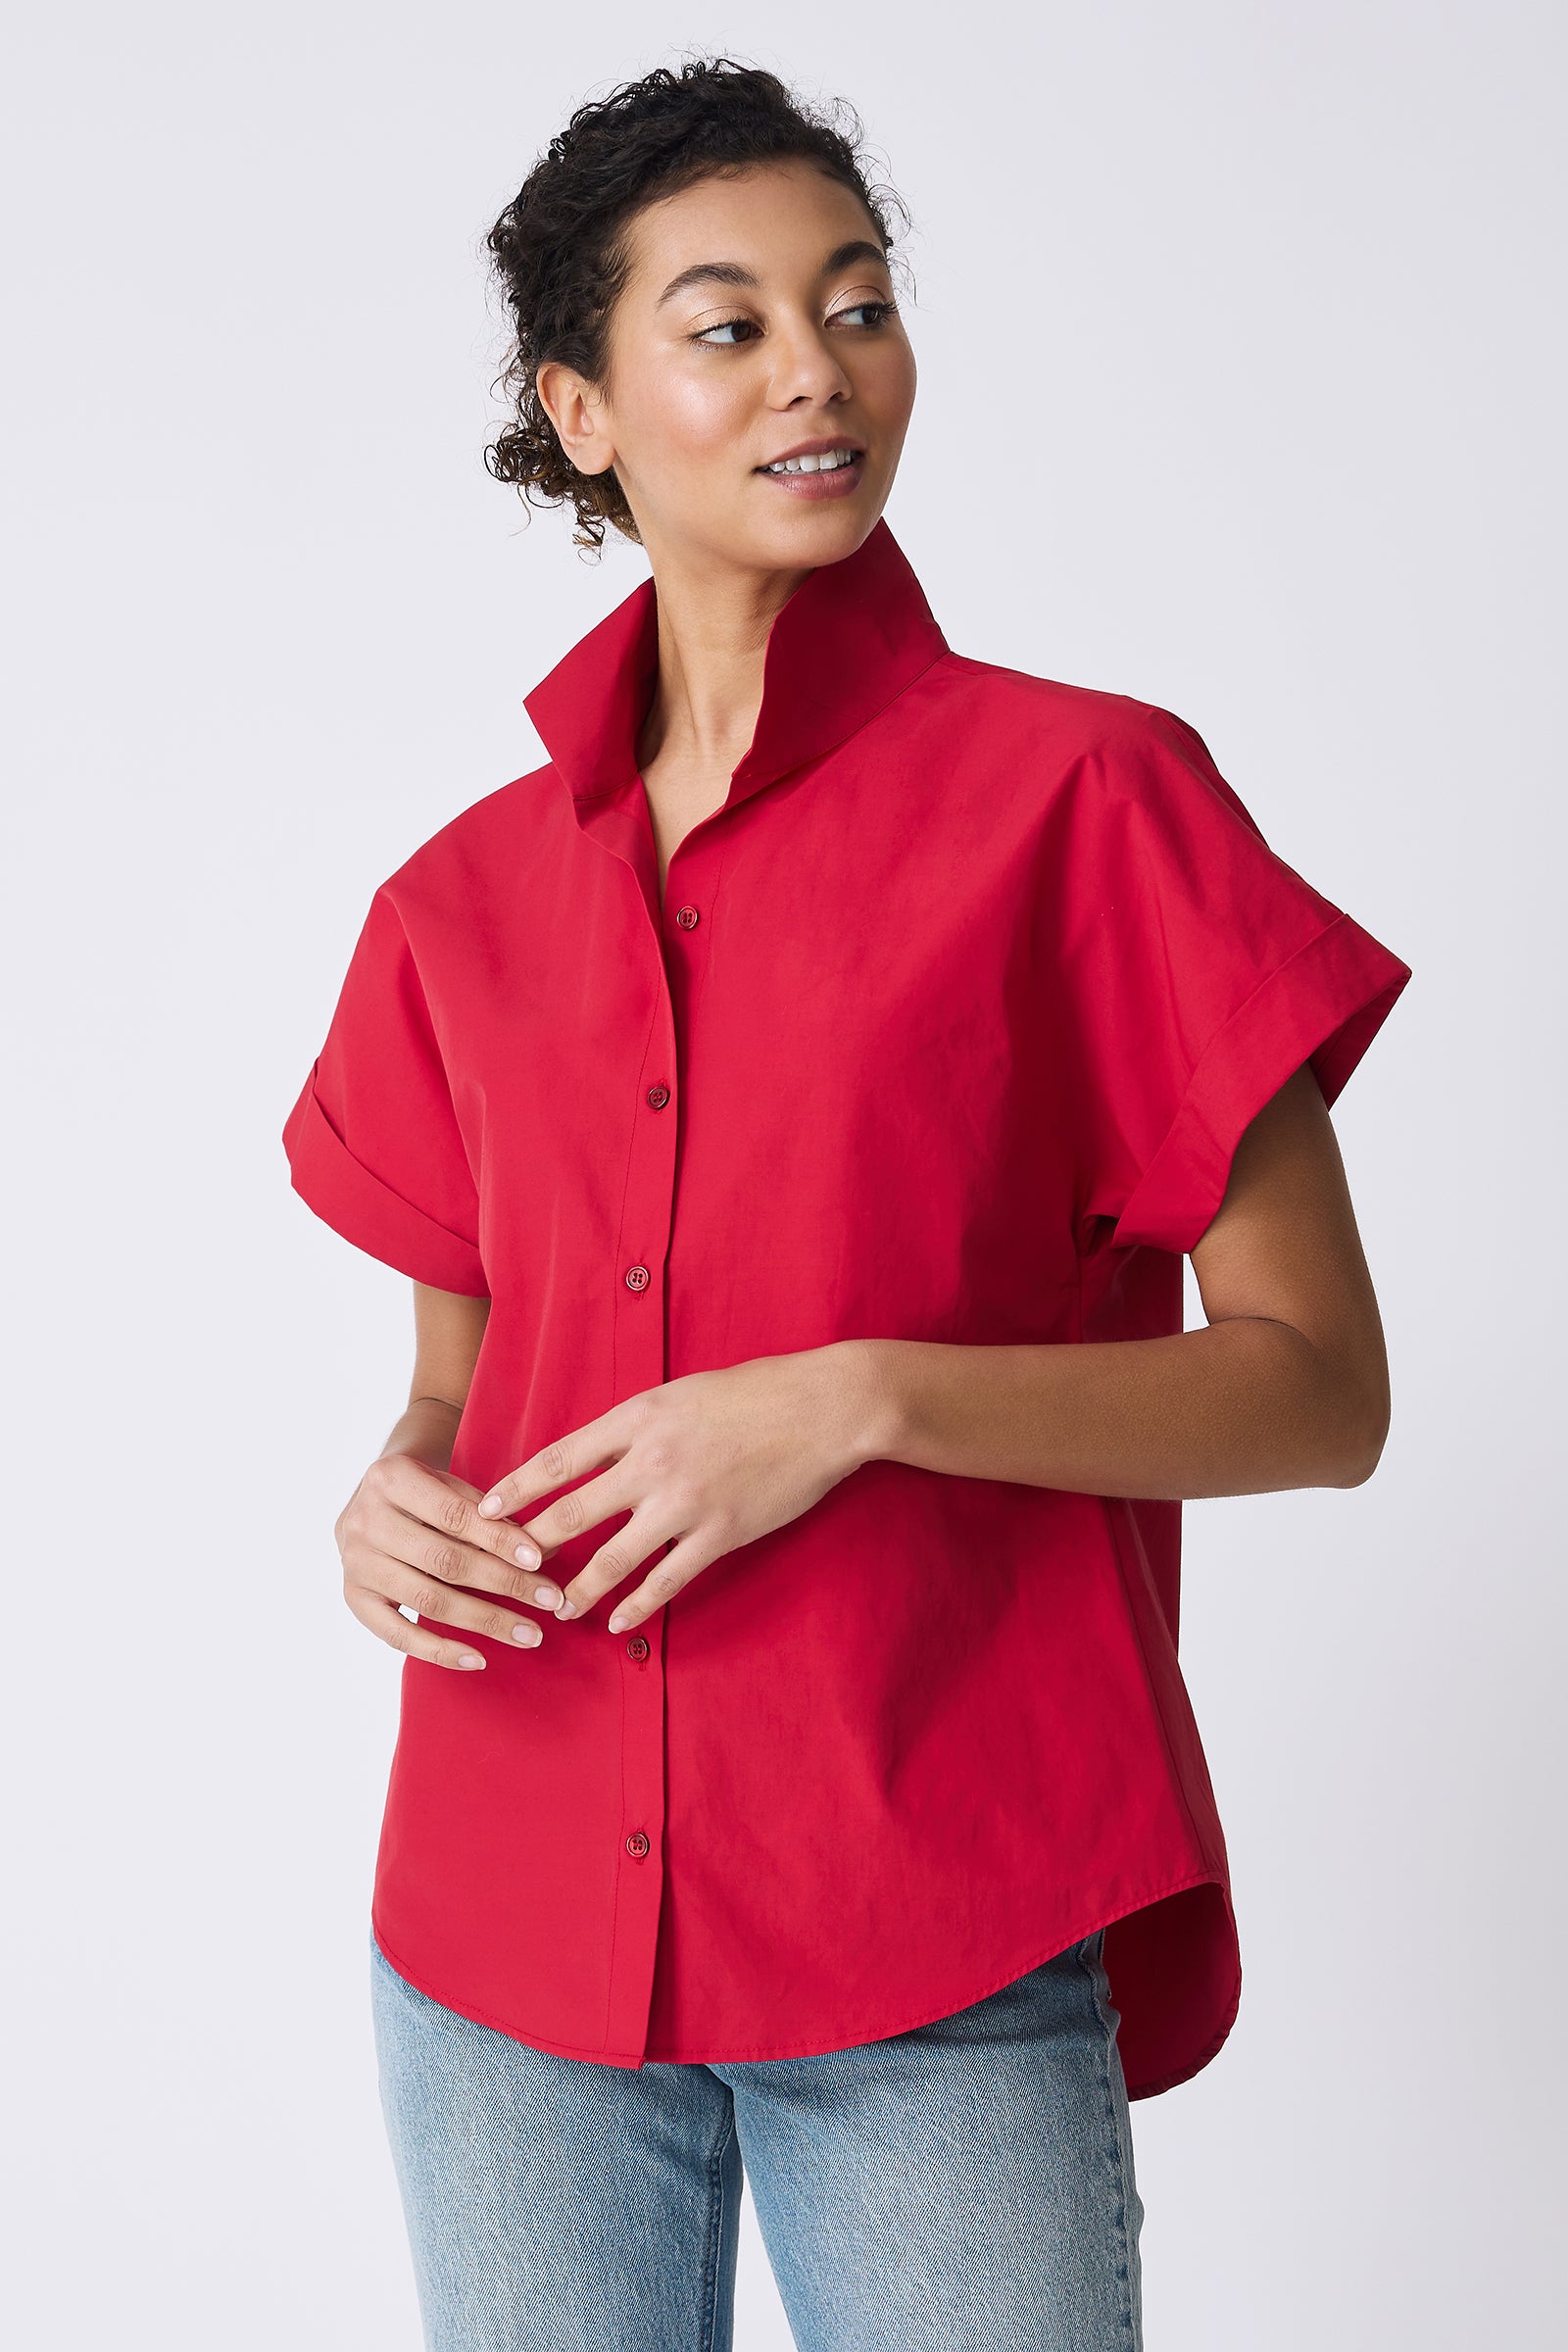 Kal Rieman Ali Kimono Top in Red on model looking left front view